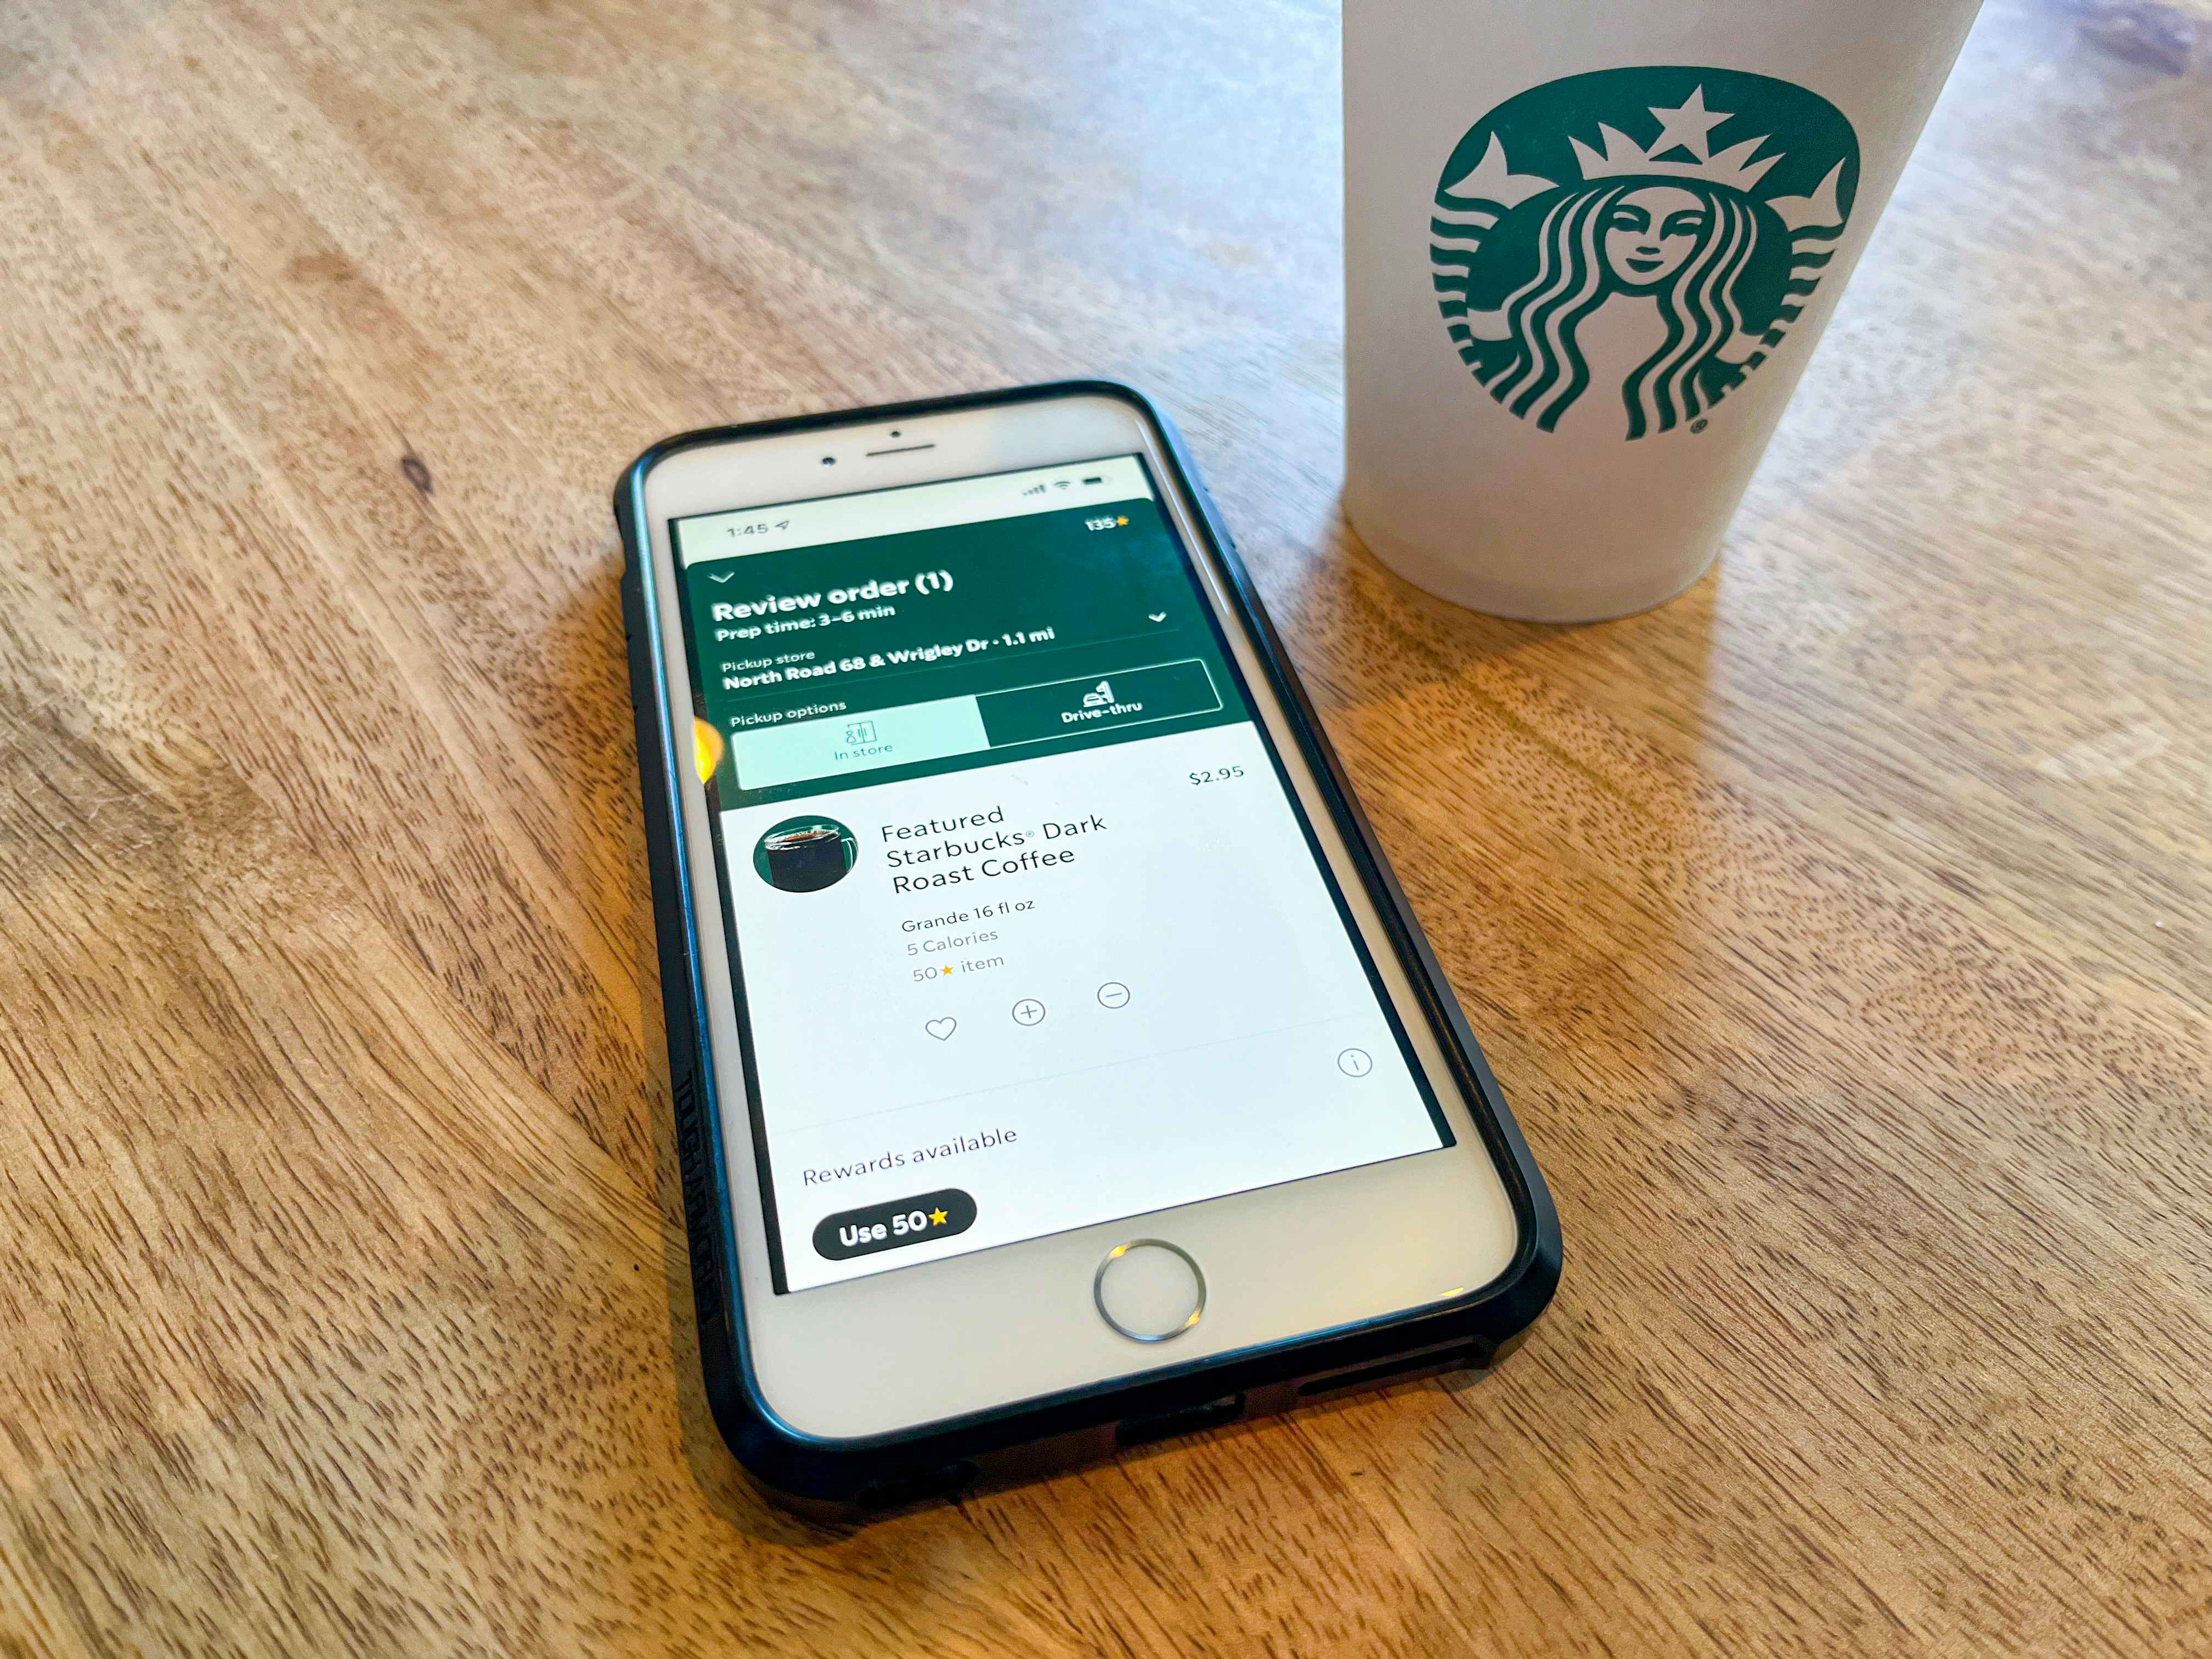 An iPhone on a table next to a Starbucks cup, displaying an order for a Grande Dark Roast Coffee on the Starbucks app.